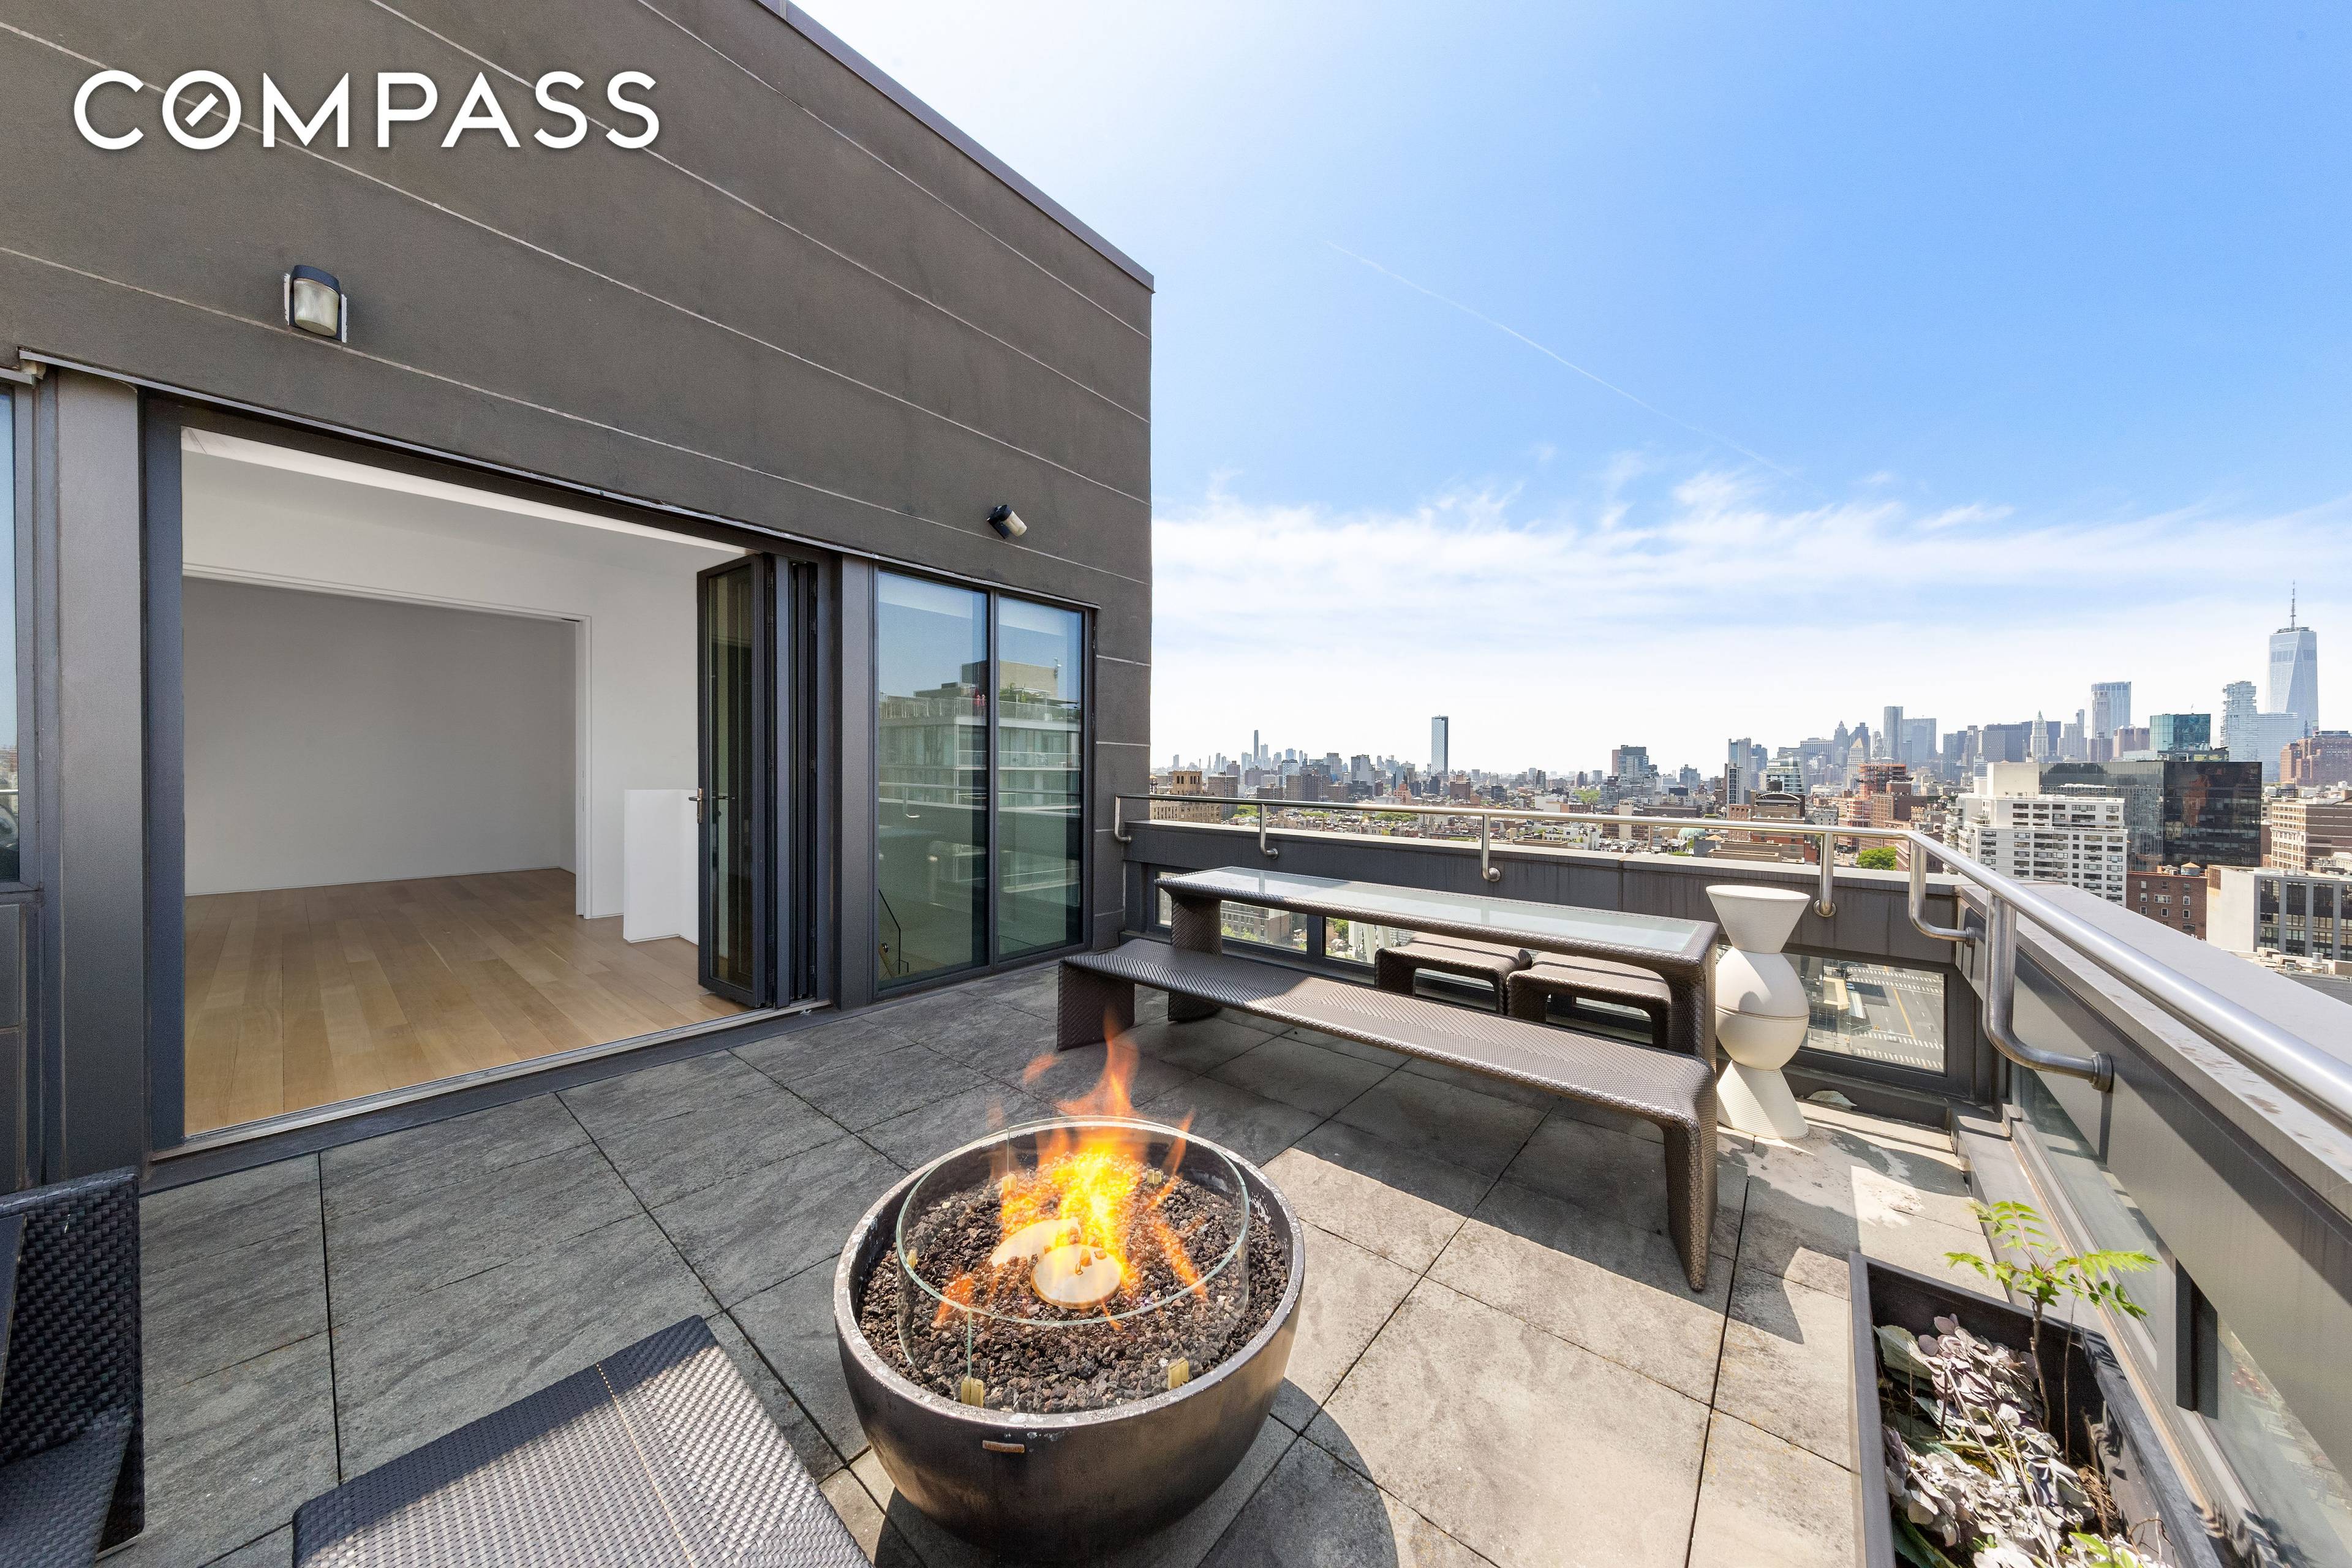 Discover some of the best views in the city from this exceptionally located three bedroom, three and a half bedroom penthouse duplex featuring sun drenched interiors and expansive outdoor space ...